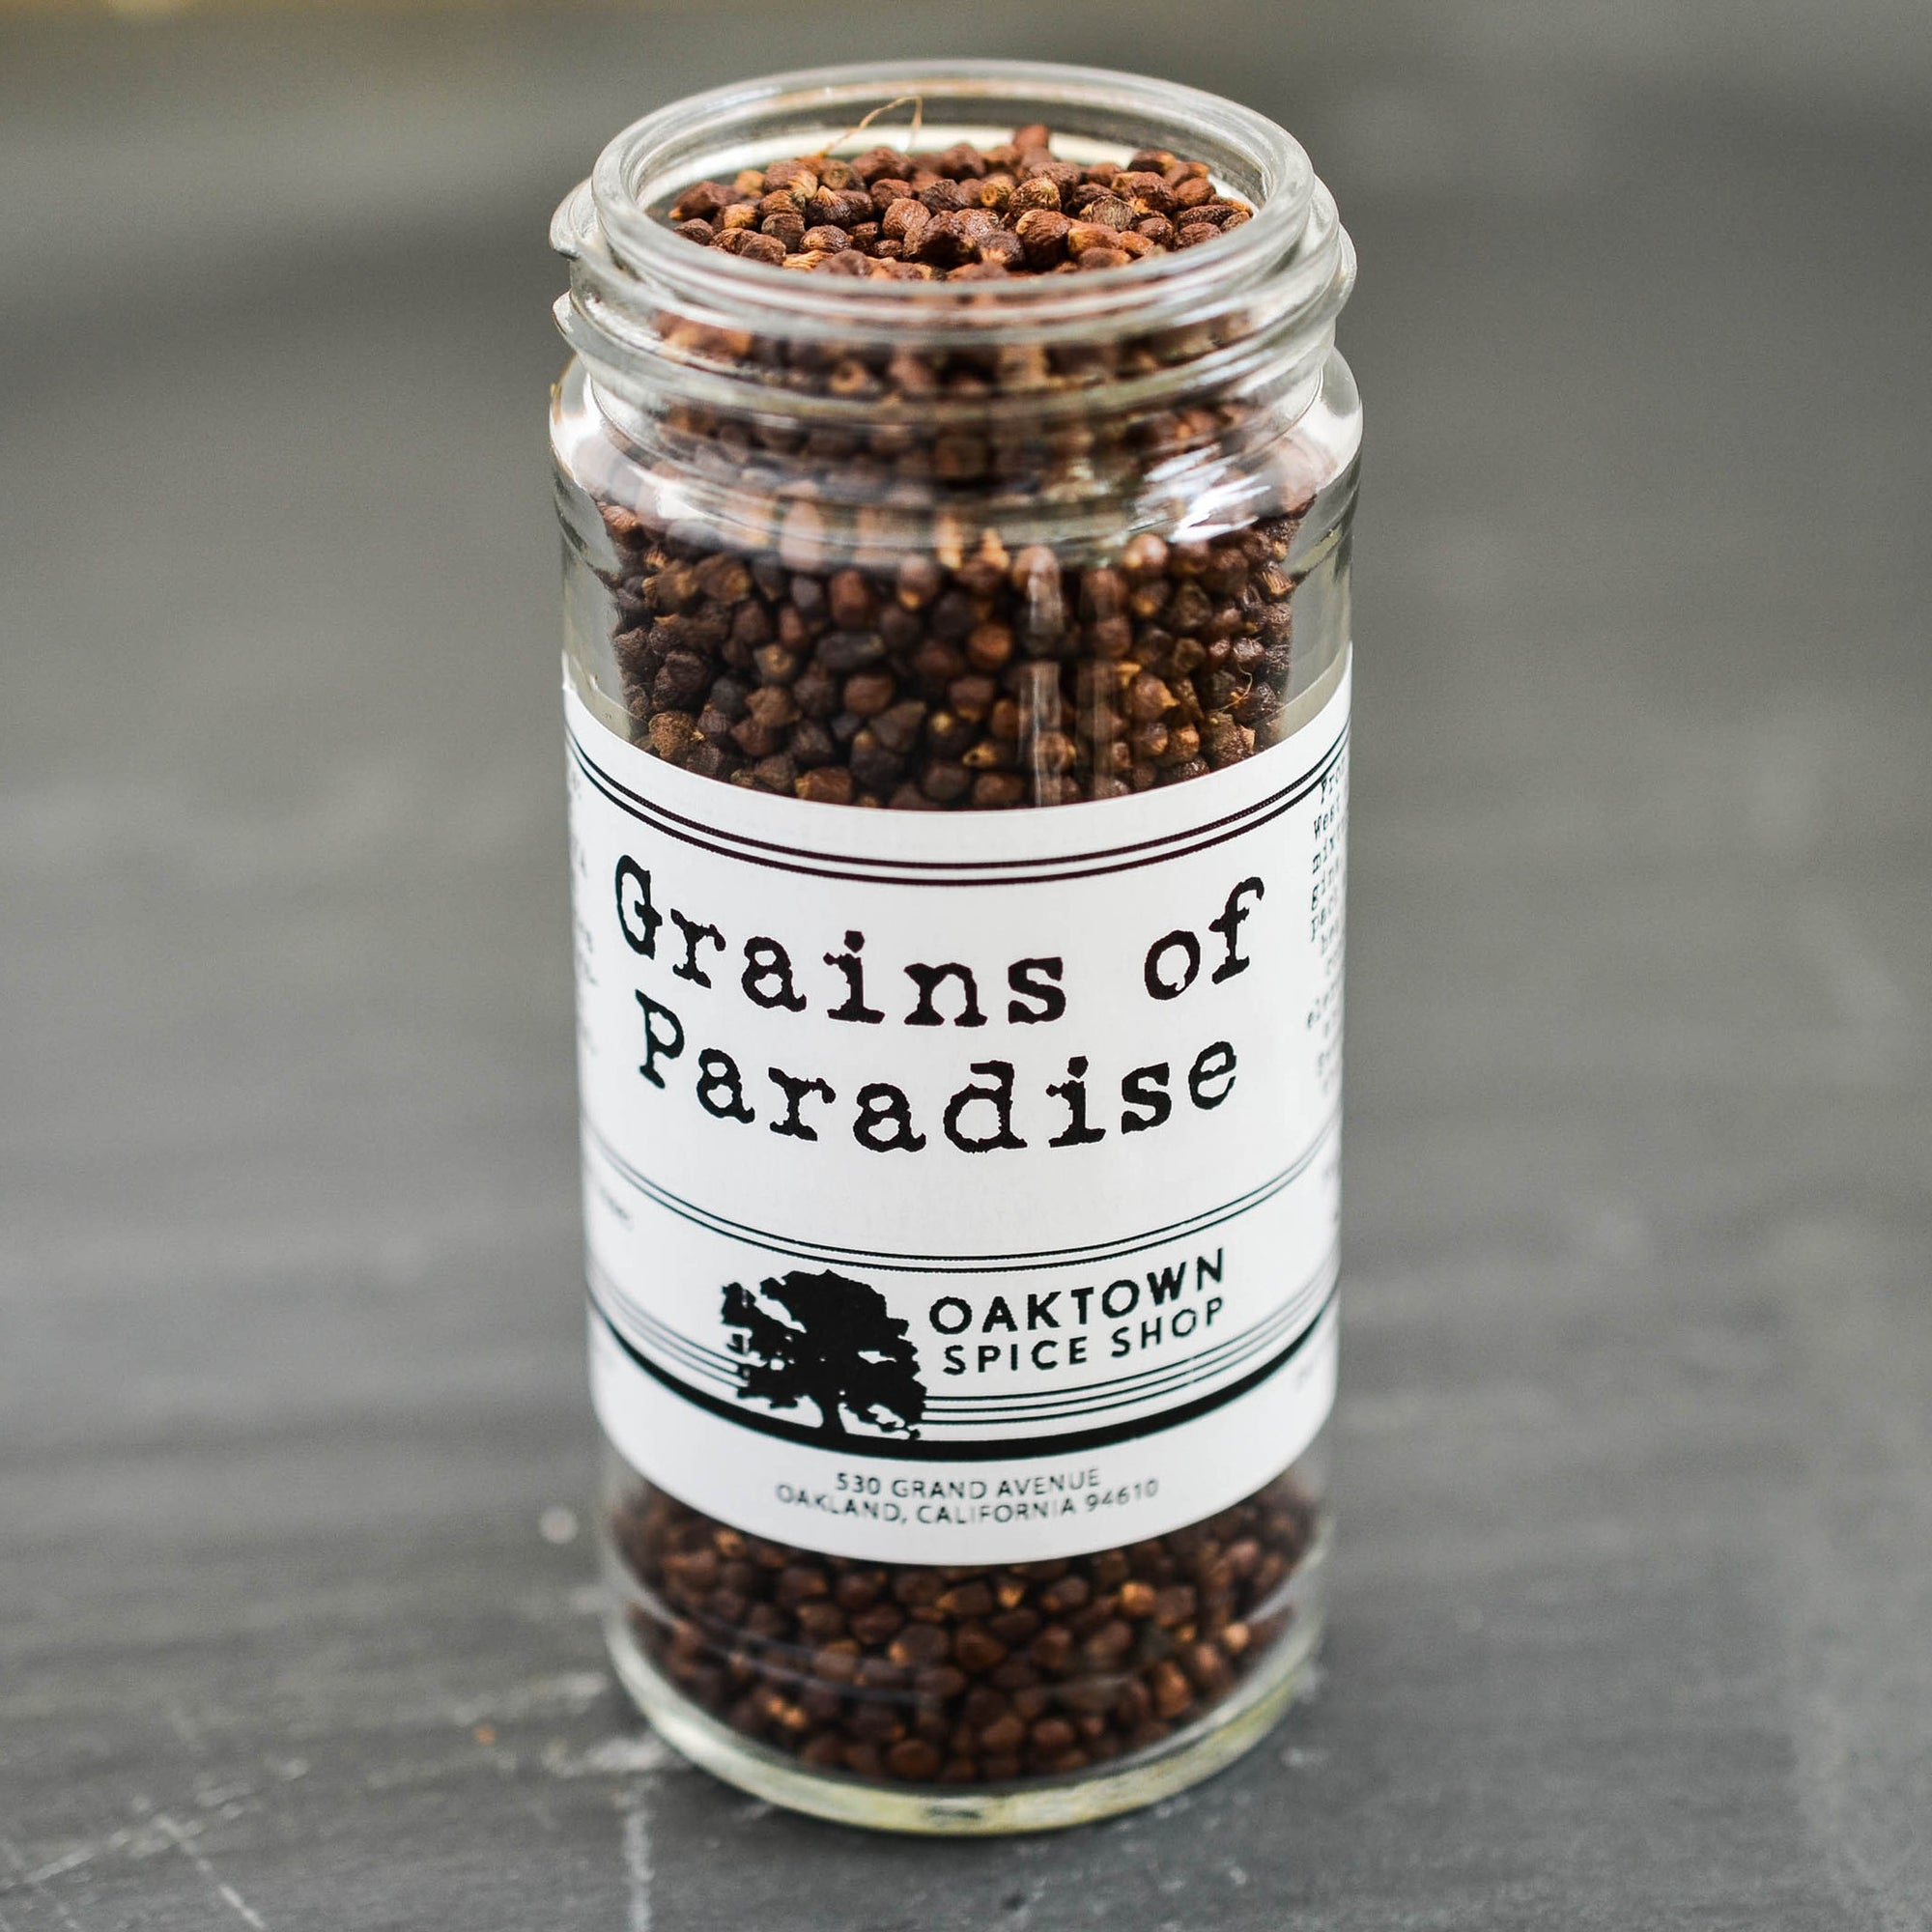 Grains of Paradise. Find this uncommon spice in traditional West African spice mixtures and exotic gins. These grains pack a pepper-like heat and flavor combined with elements of ginger and cardamom. Also known as Melegueta Pepper, Guinea Pepper, Alligator Pepper or Ginny Grains. Hand Mixed by Oaktown Spice Shop.